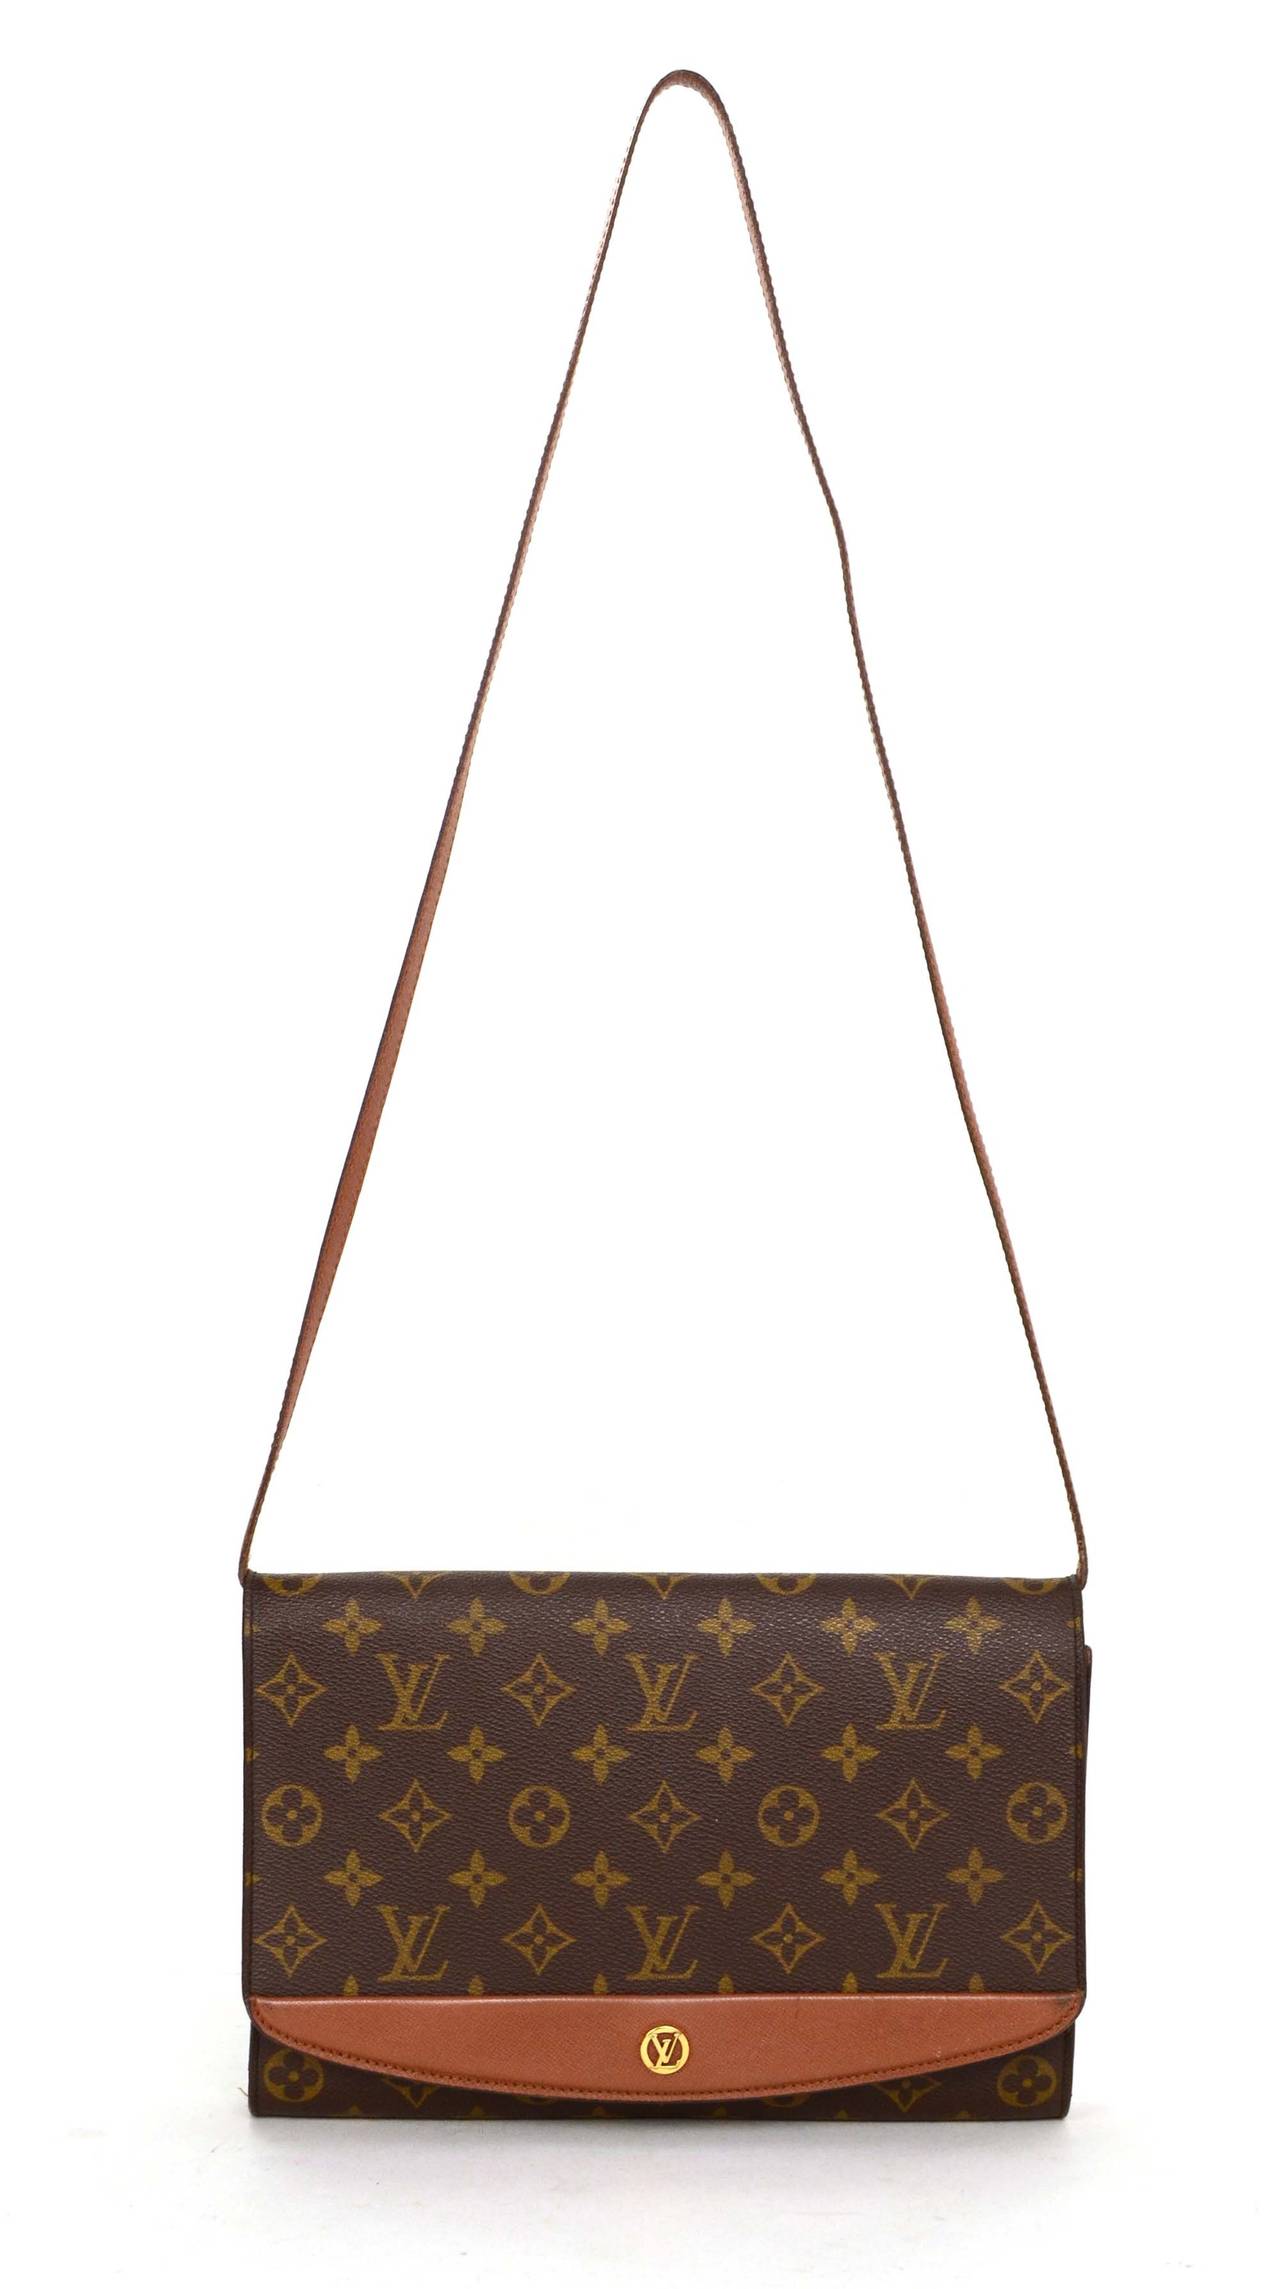 Louis Vuitton Ladies Clutch Bag | Confederated Tribes of the Umatilla Indian Reservation